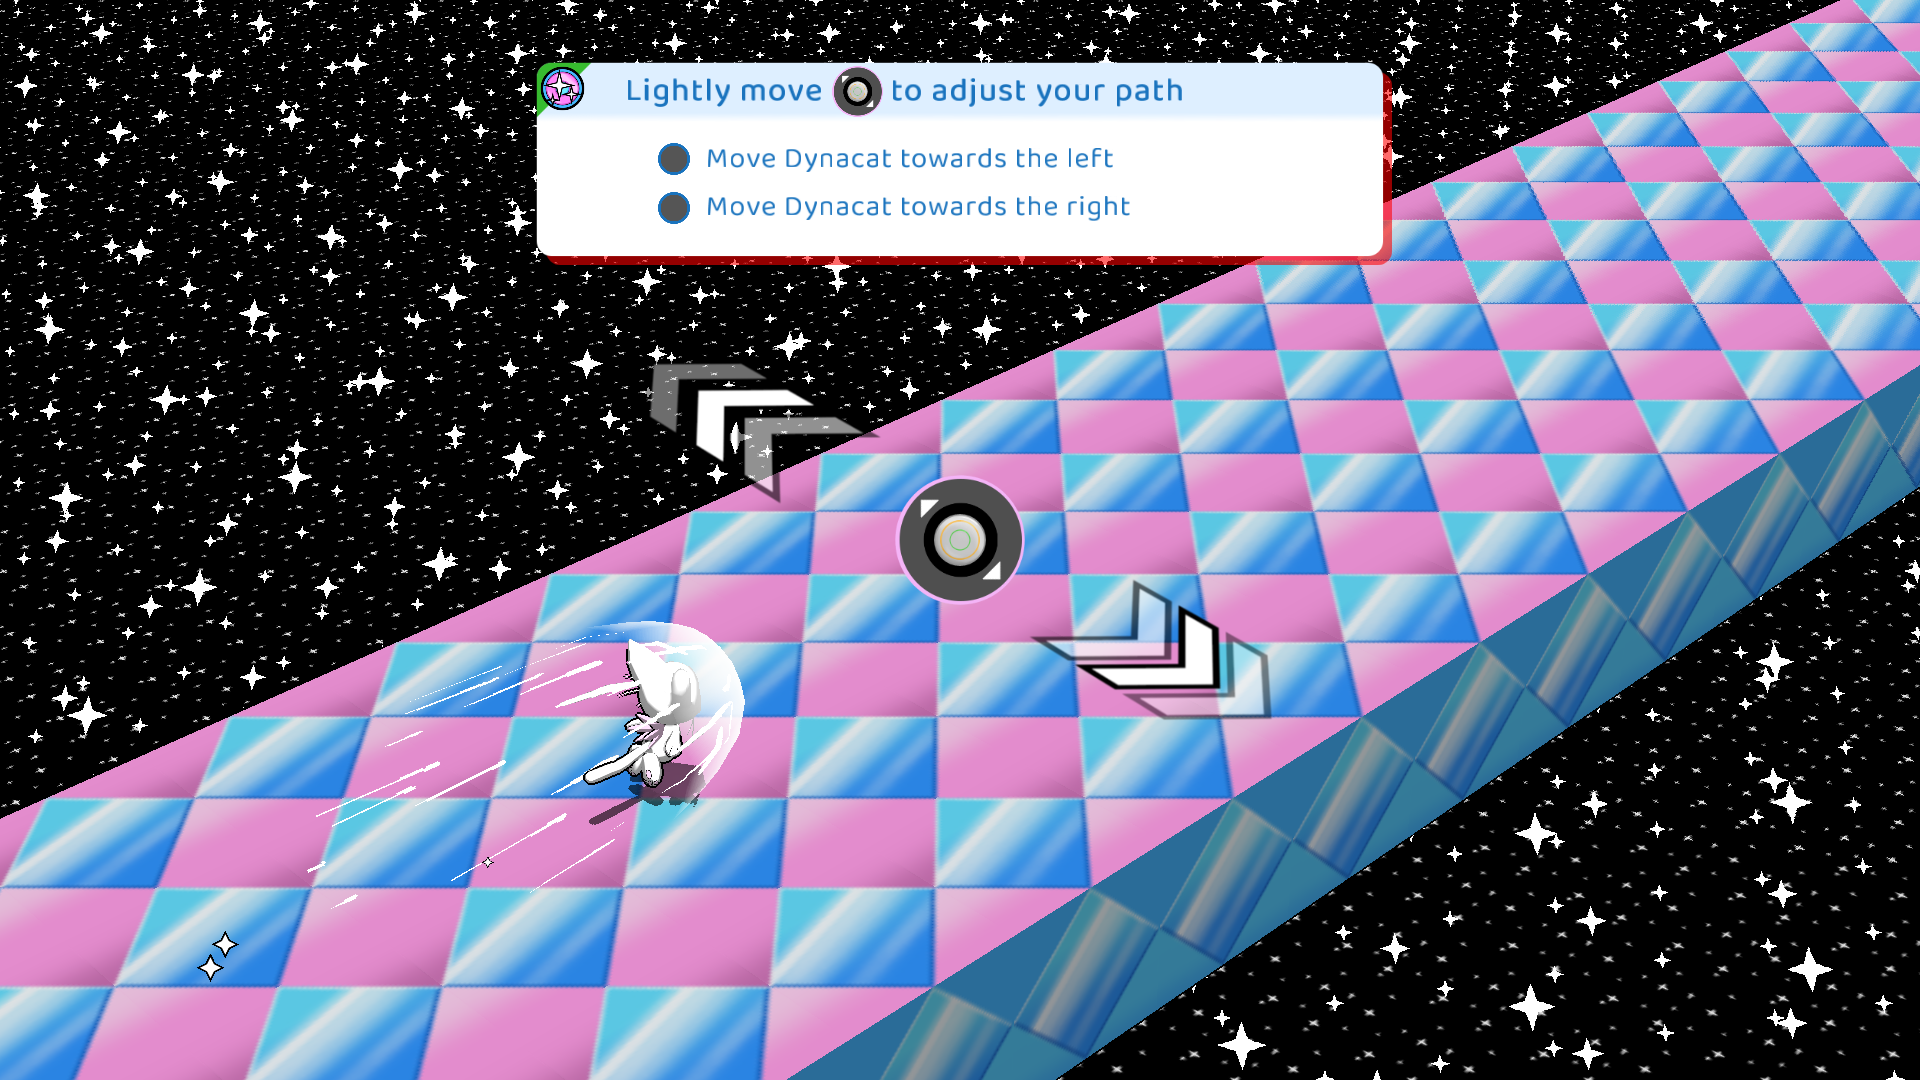 A screenshot of the tutorial stage